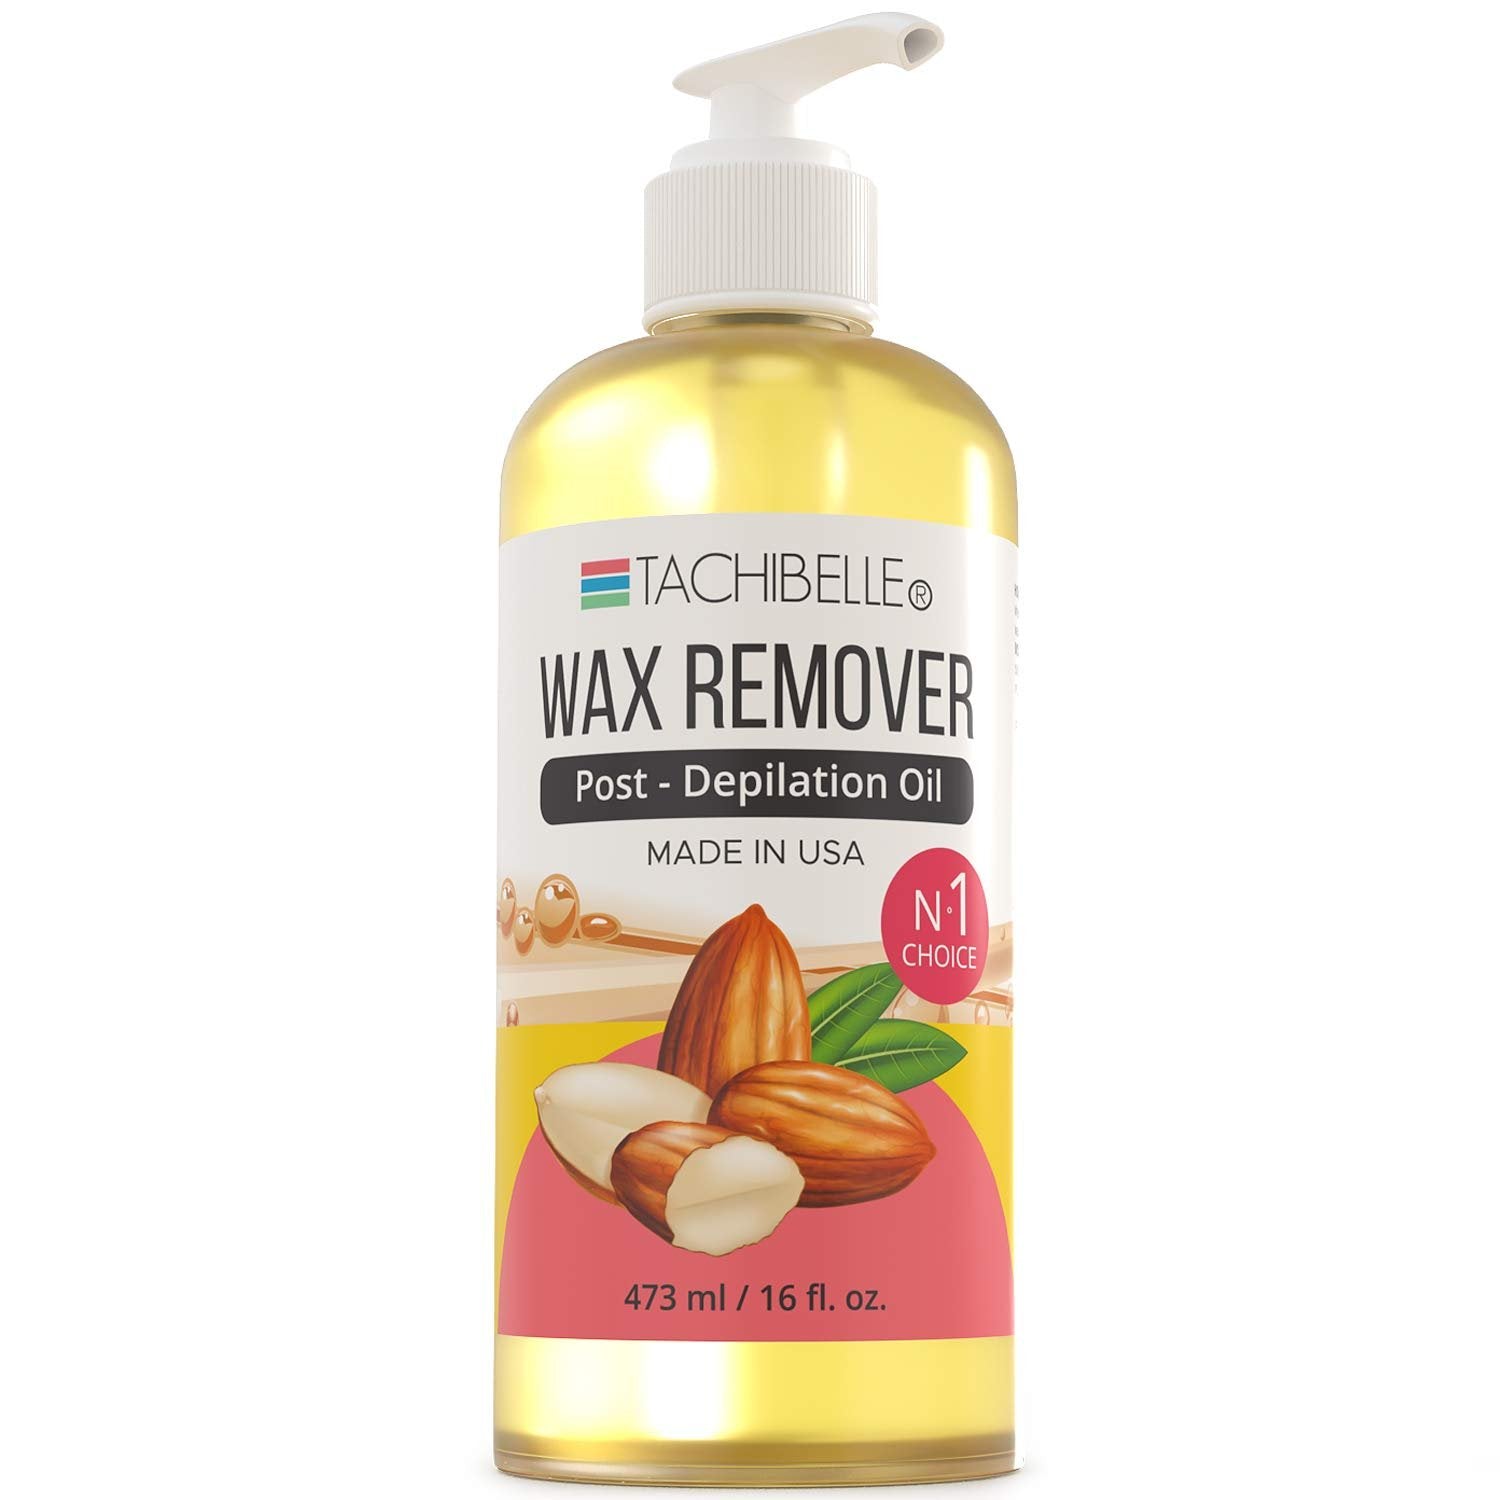 Tachibelle Post-Depilation Set of 2 Wax Remover Oil Enriched with Almond Oil + Skin Cleanser Solution Formulated with Hazel 16oz.